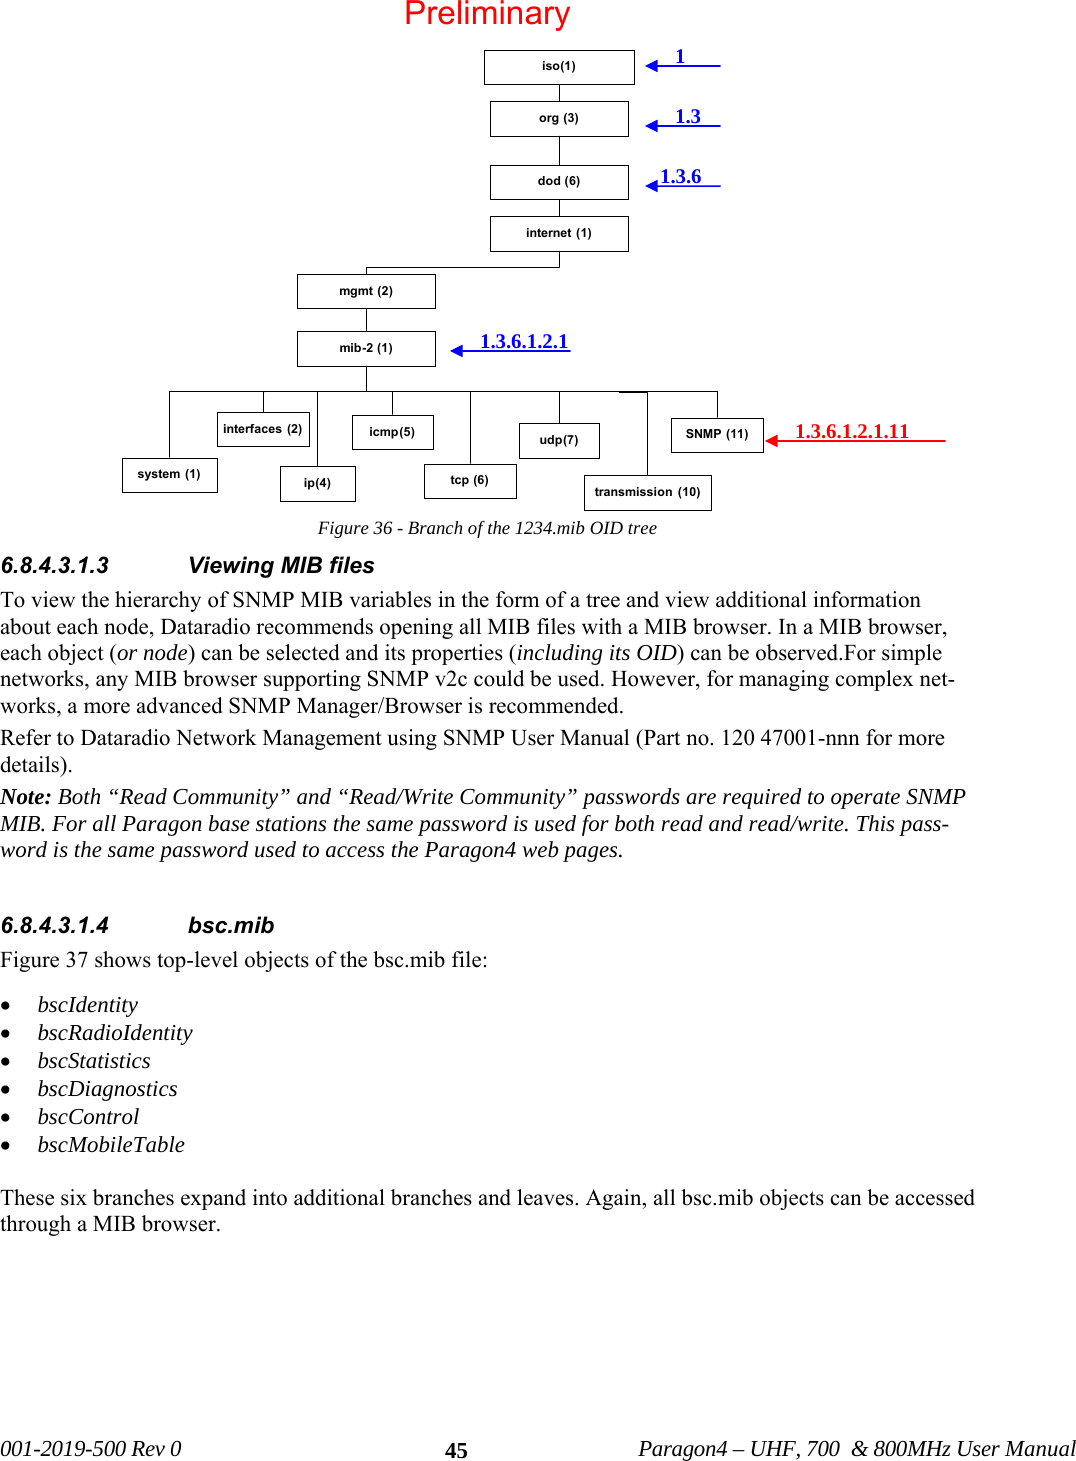   001-2019-500 Rev 0          Paragon4 – UHF, 700  &amp; 800MHz User Manual   45Figure 36 - Branch of the 1234.mib OID tree  6.8.4.3.1.3 Viewing MIB files To view the hierarchy of SNMP MIB variables in the form of a tree and view additional information about each node, Dataradio recommends opening all MIB files with a MIB browser. In a MIB browser, each object (or node) can be selected and its properties (including its OID) can be observed.For simple networks, any MIB browser supporting SNMP v2c could be used. However, for managing complex net-works, a more advanced SNMP Manager/Browser is recommended. Refer to Dataradio Network Management using SNMP User Manual (Part no. 120 47001-nnn for more details). Note: Both “Read Community” and “Read/Write Community” passwords are required to operate SNMP MIB. For all Paragon base stations the same password is used for both read and read/write. This pass-word is the same password used to access the Paragon4 web pages.   6.8.4.3.1.4 bsc.mib  Figure 37 shows top-level objects of the bsc.mib file: • bscIdentity • bscRadioIdentity • bscStatistics • bscDiagnostics • bscControl • bscMobileTable  These six branches expand into additional branches and leaves. Again, all bsc.mib objects can be accessed through a MIB browser.   org (3)iso(1)ip(4)icmp(5) SNMP (11)udp(7)system (1)interfaces (2)dod (6)internet (1)mgmt (2)mib-2 (1)tcp (6) transmission (10)1.3.6.1.2.1 1.3.6.1.2.1.11 1 1.3.6 1.3 Preliminary